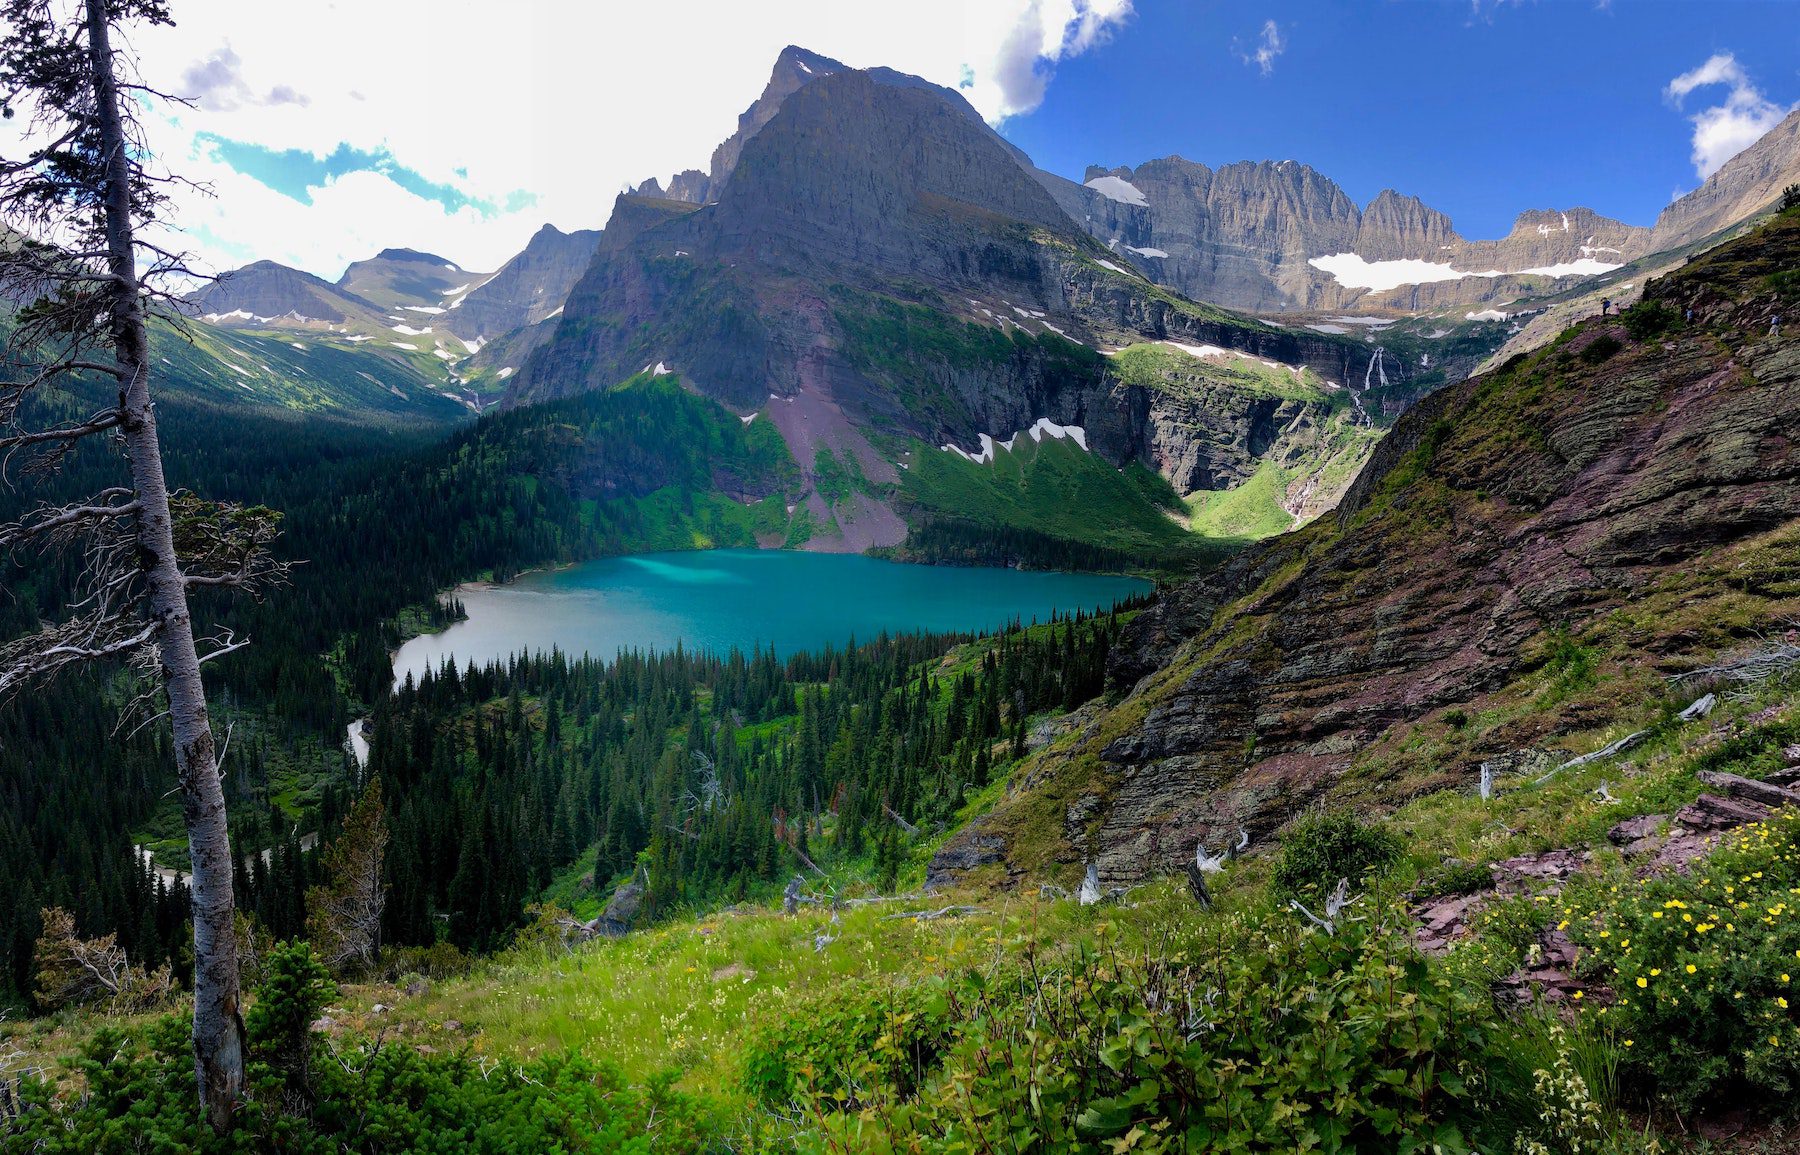 Glacier National Park in United States with stunning view of mountains and crystal blue water with a tree-line shore.